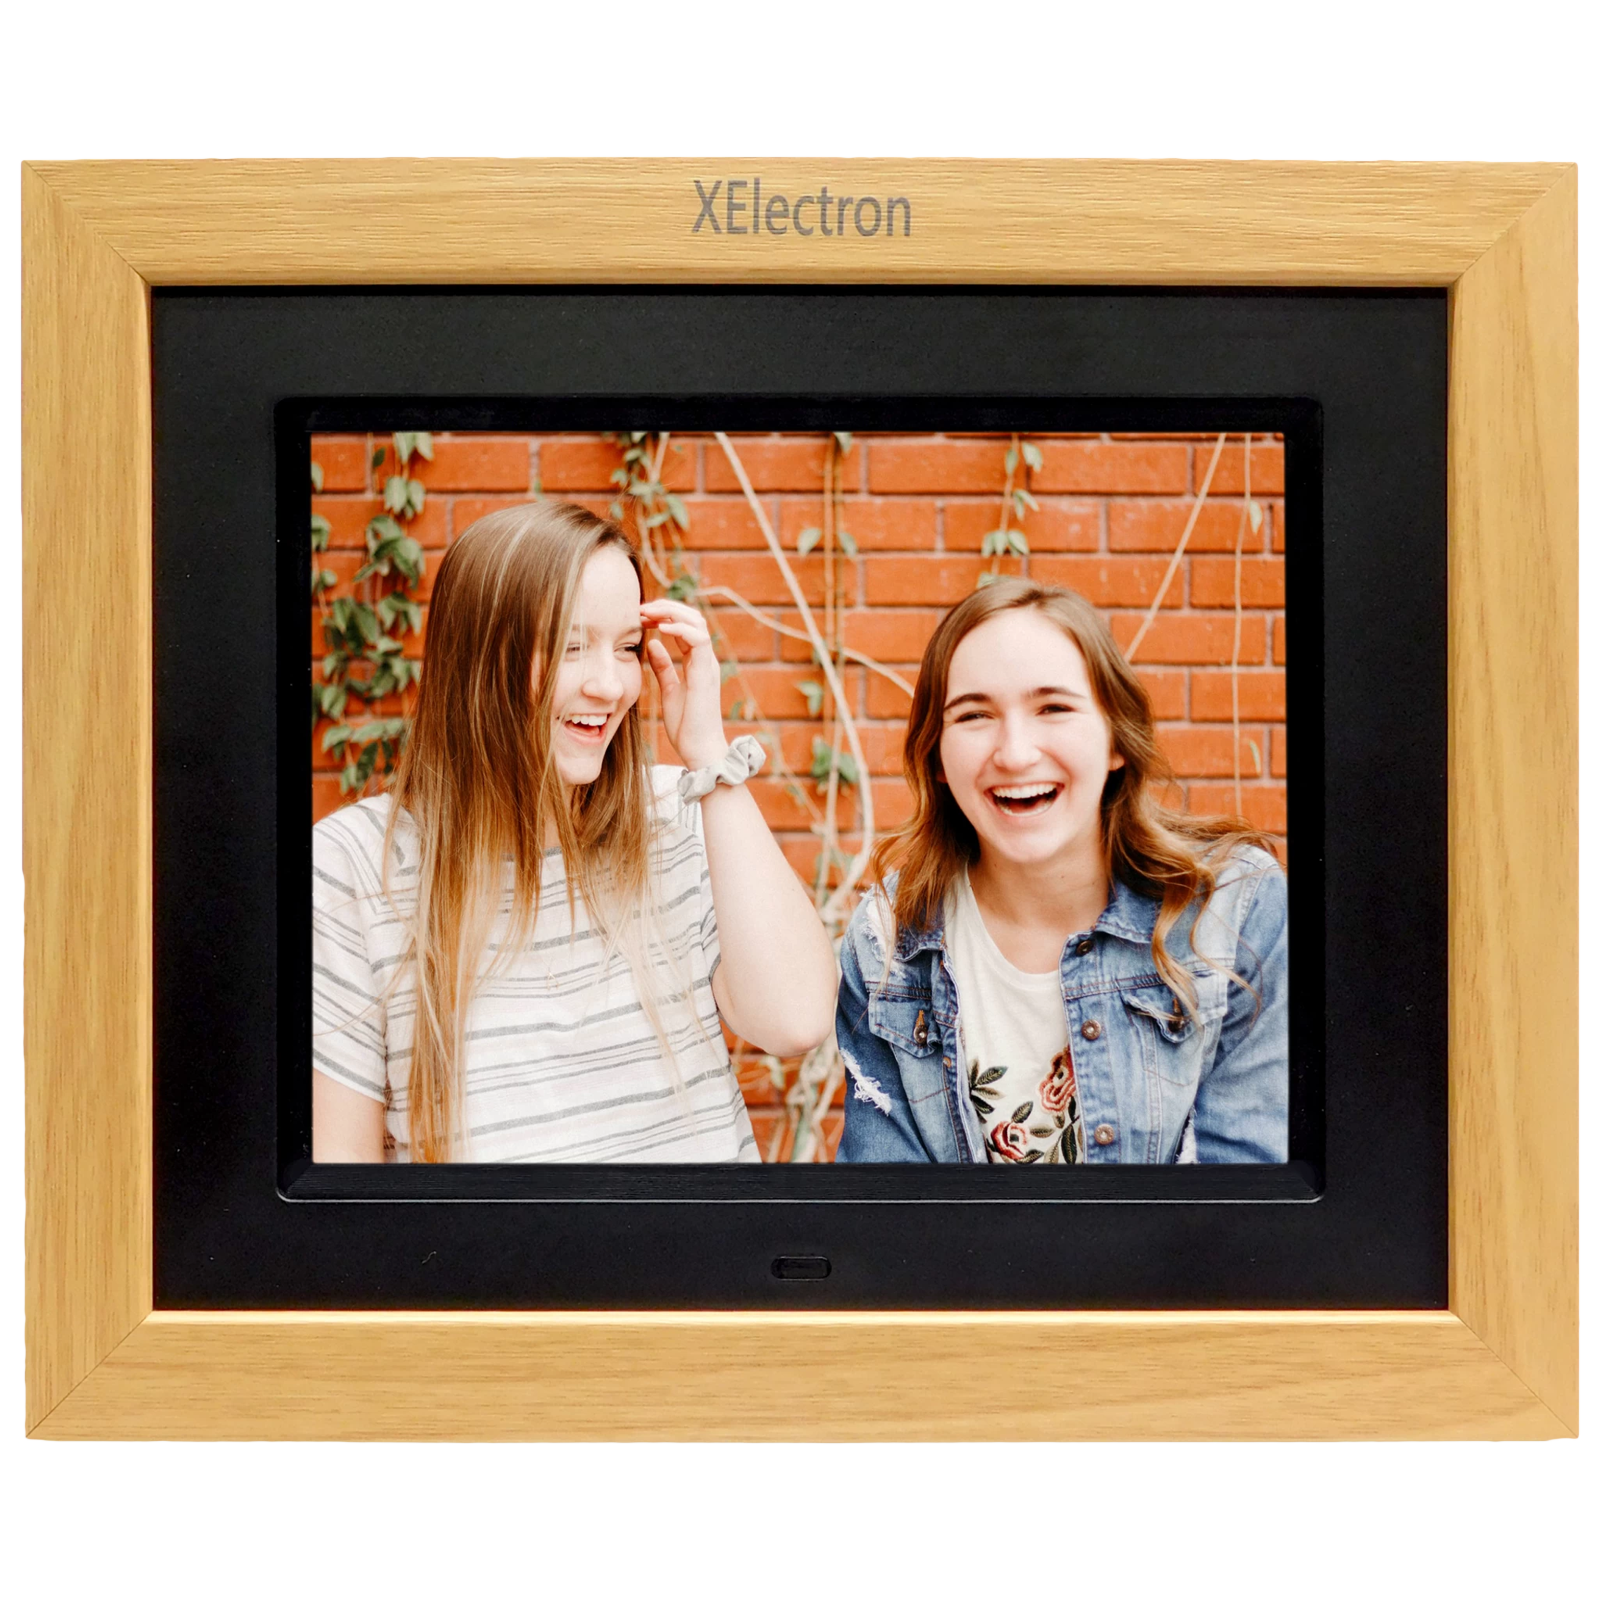 XElectron 20.32cm (8 Inches) Digital Photo Frame (IPS Display, DPF805Wi, Wooden and Black)